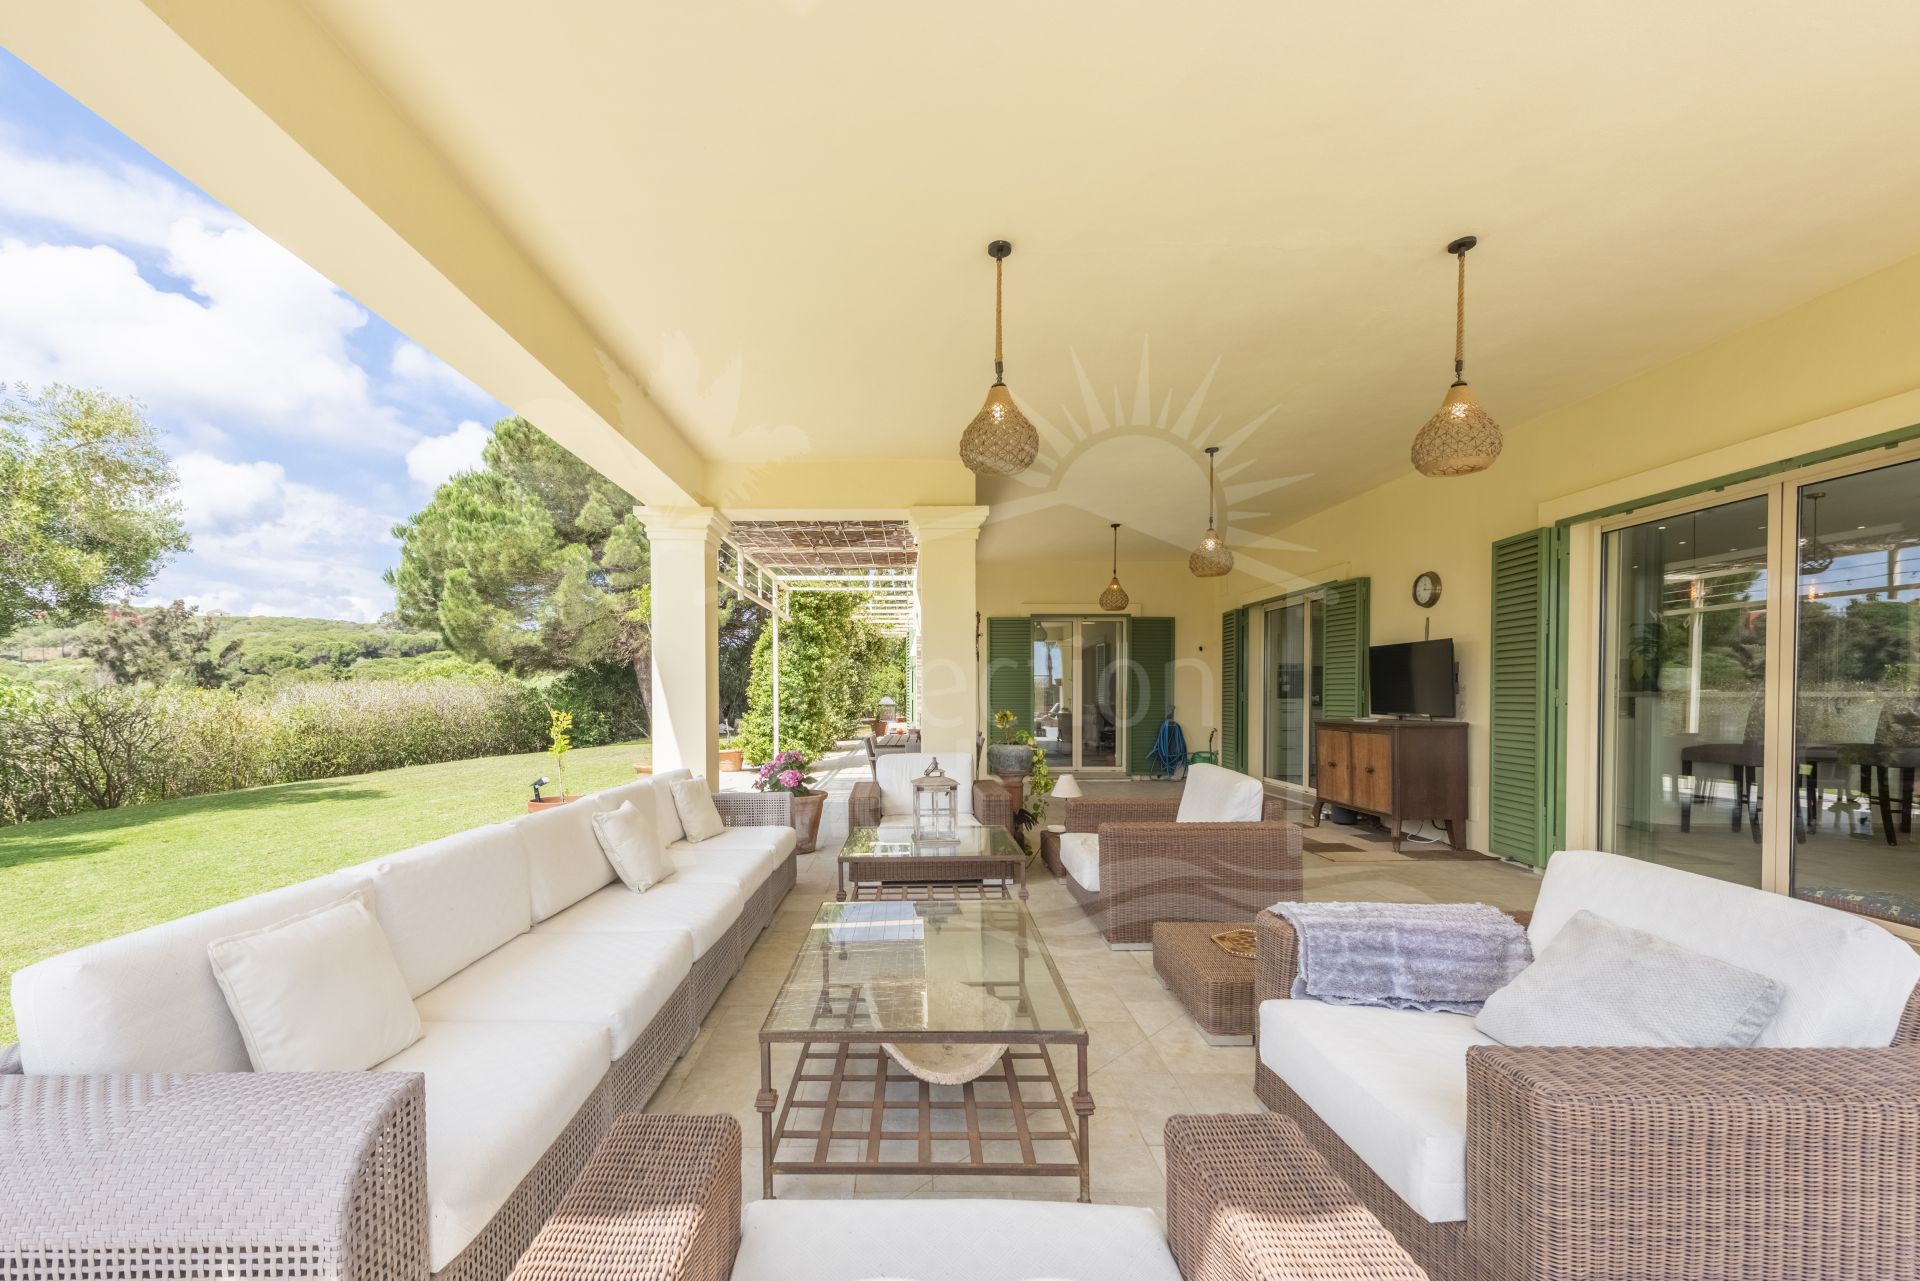 Stunning Family Villa in Sotogrande Alto, With Sea Views and Separate Guest Accommodation